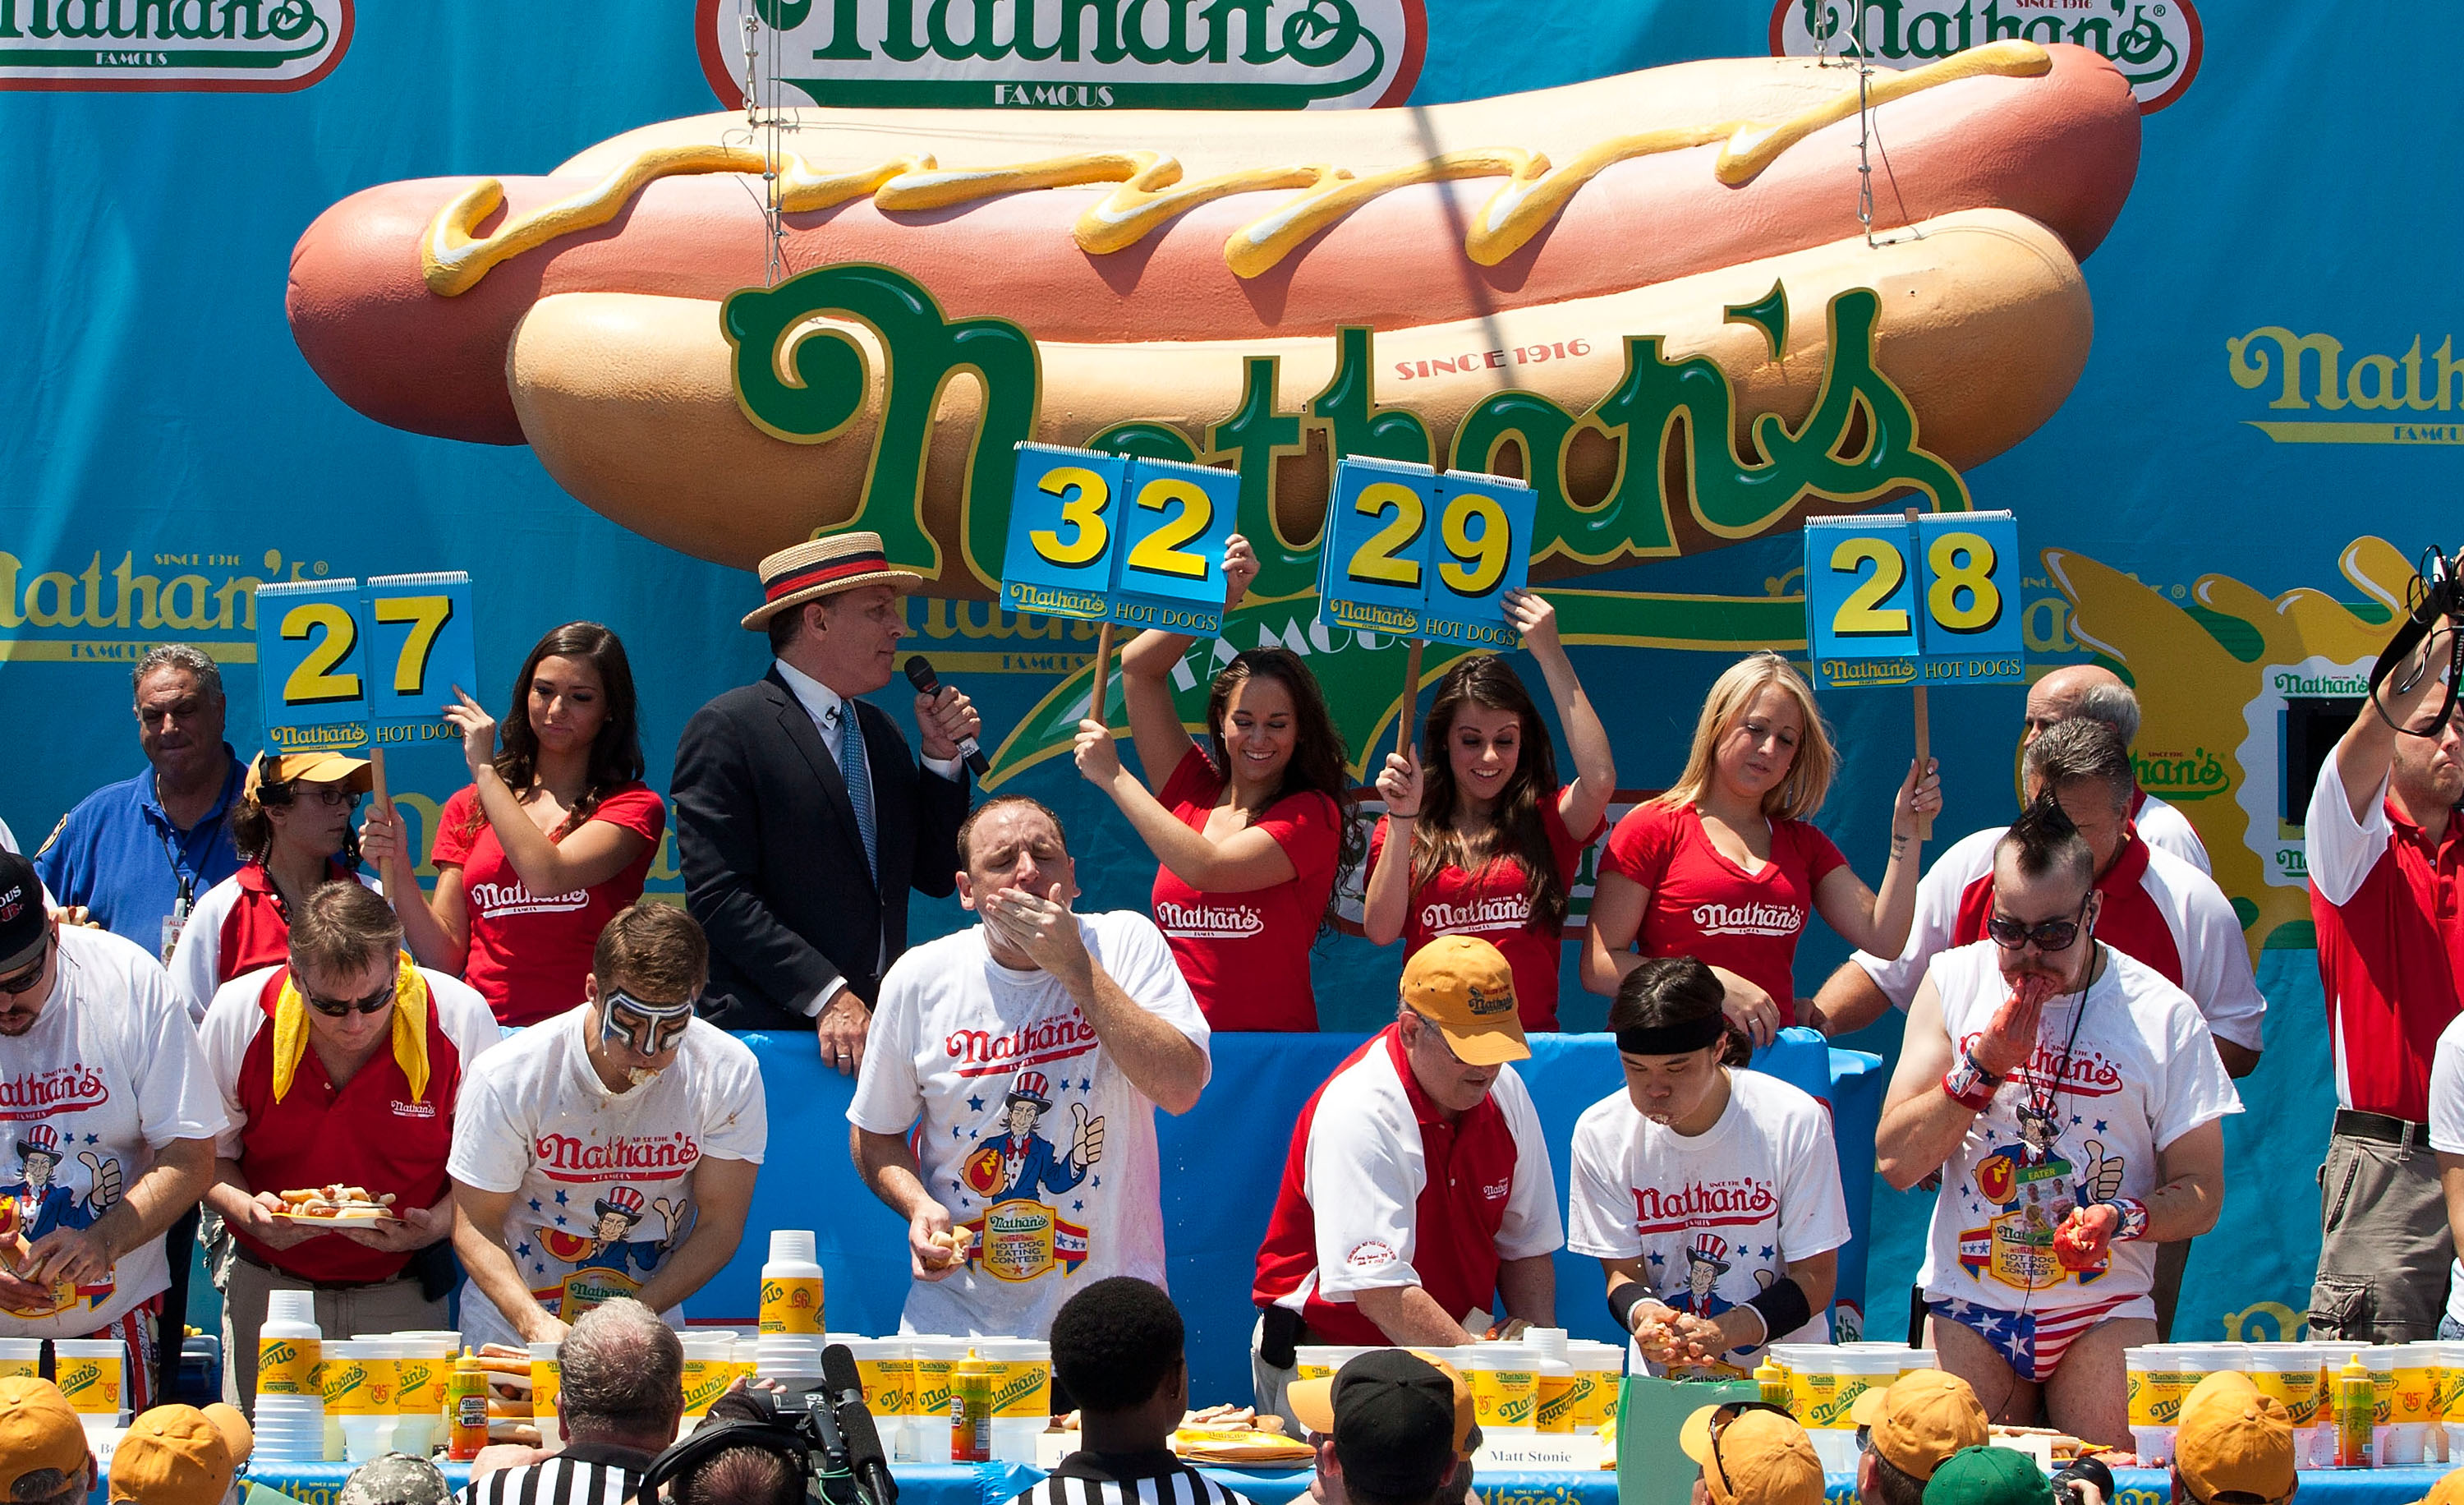 Competitors Vie For Ultimate Eating Prize At Nathan’s Hot Dog Eating Contest